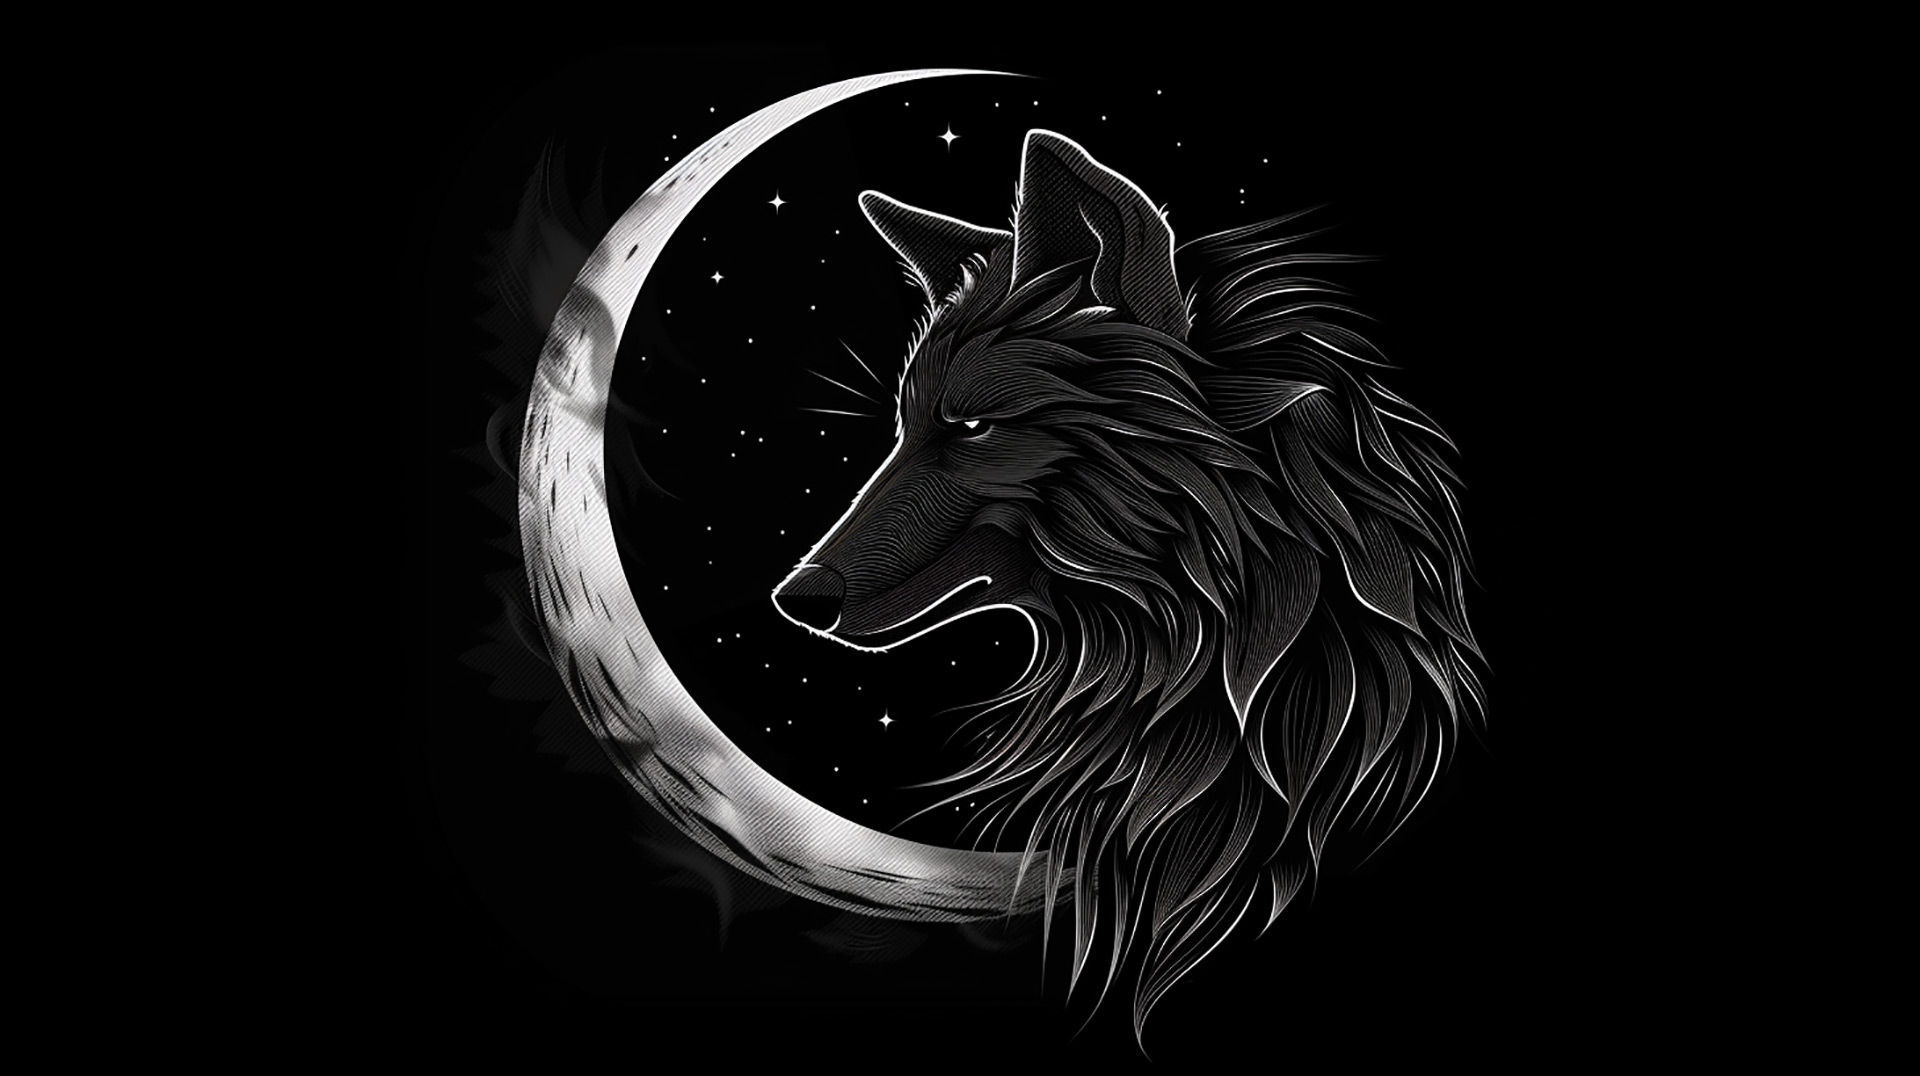 Mystic Night: Wolf and Full Moon Image